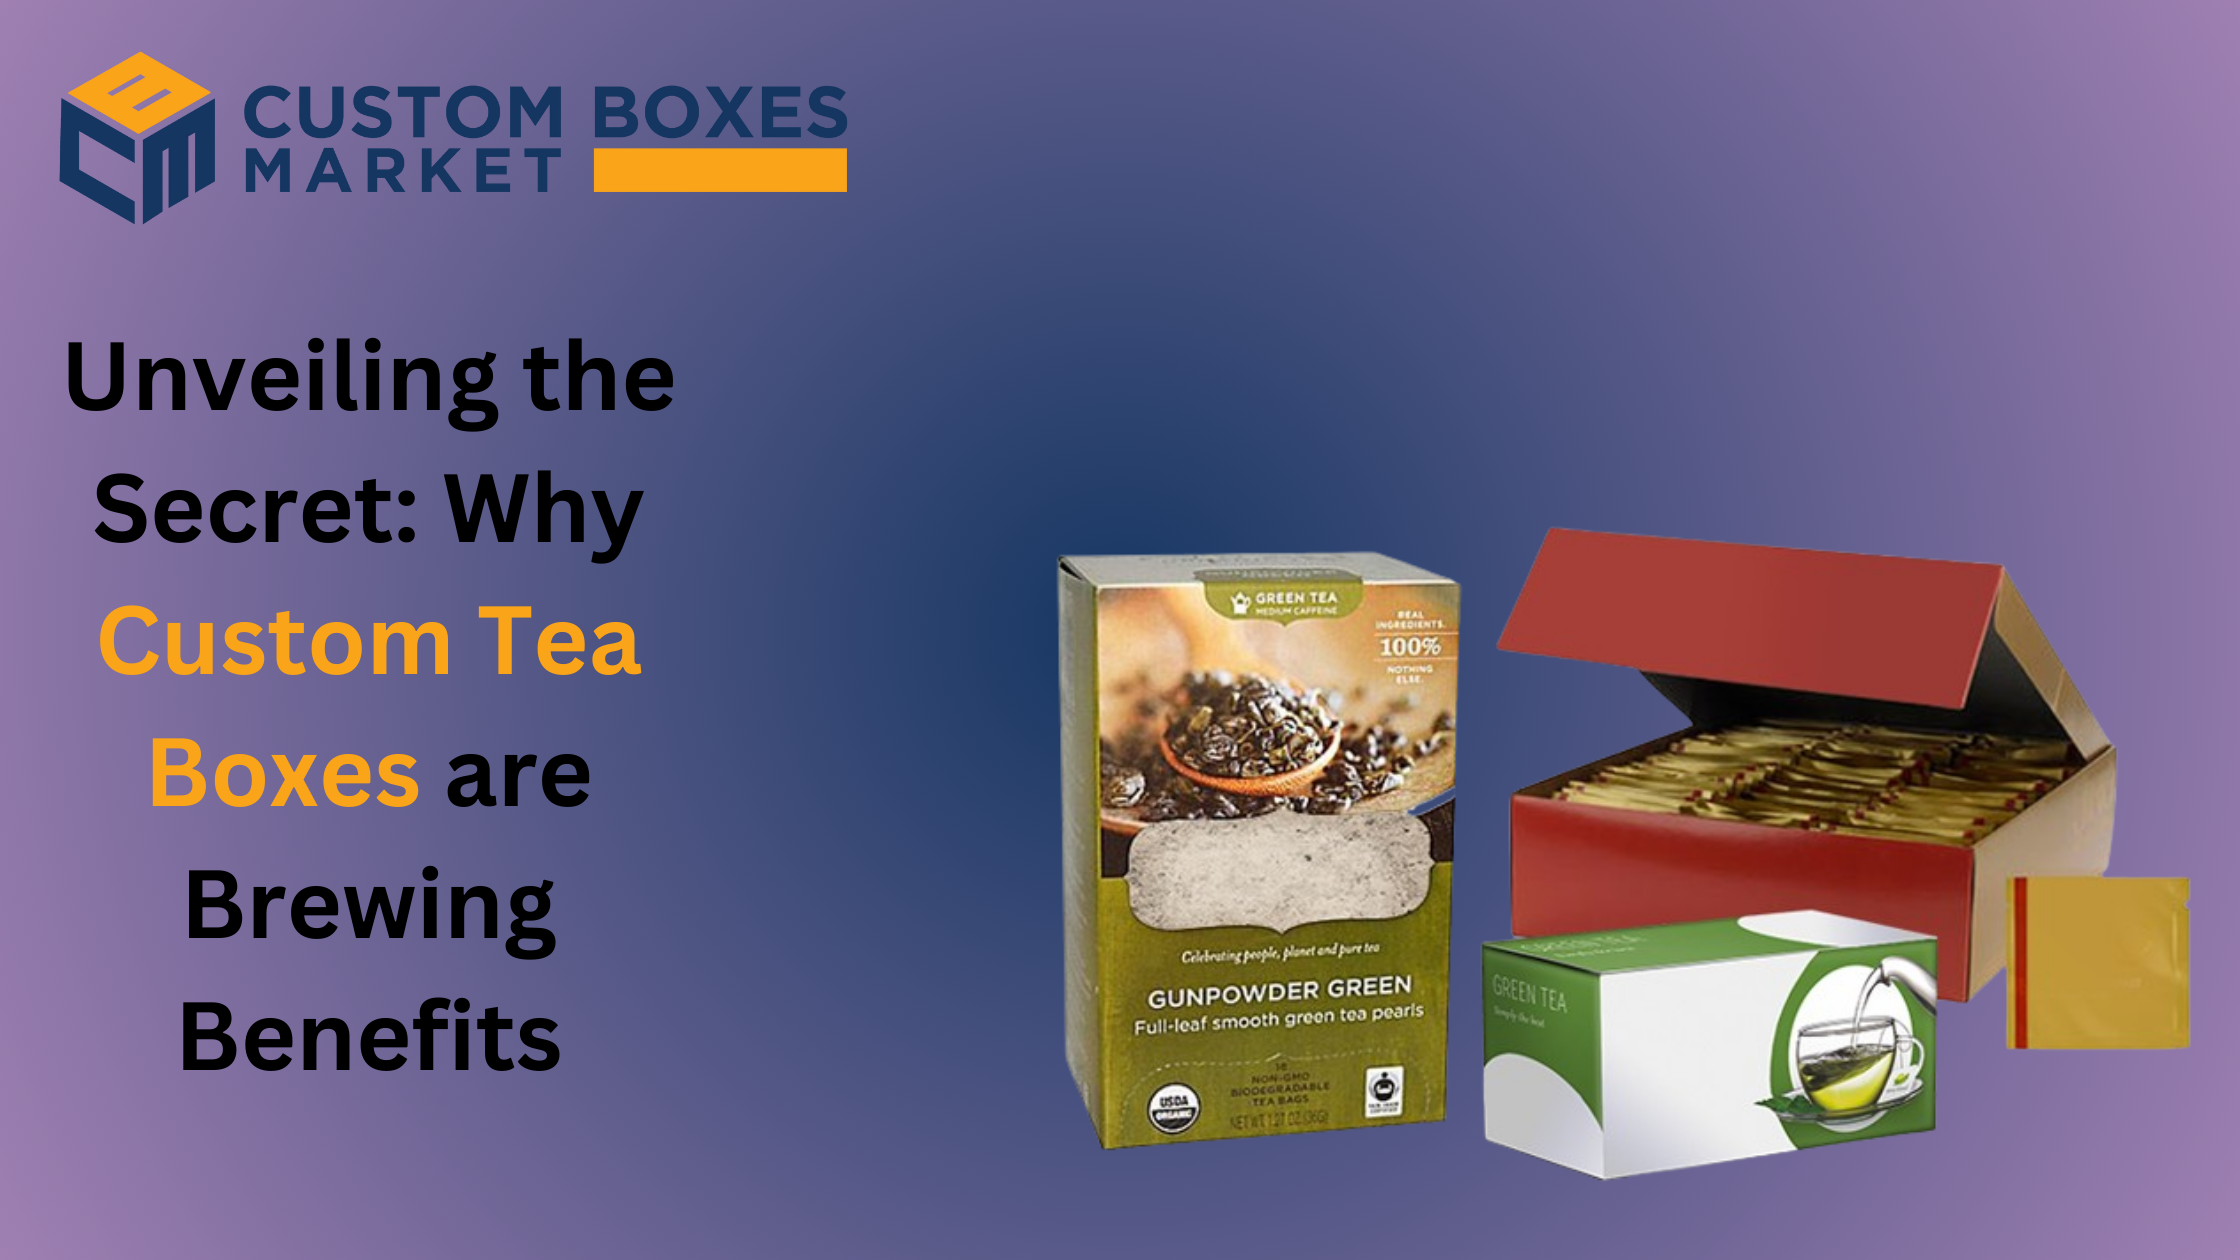 Unveiling the Secret: Why Custom Tea Boxes are Brewing Benefits